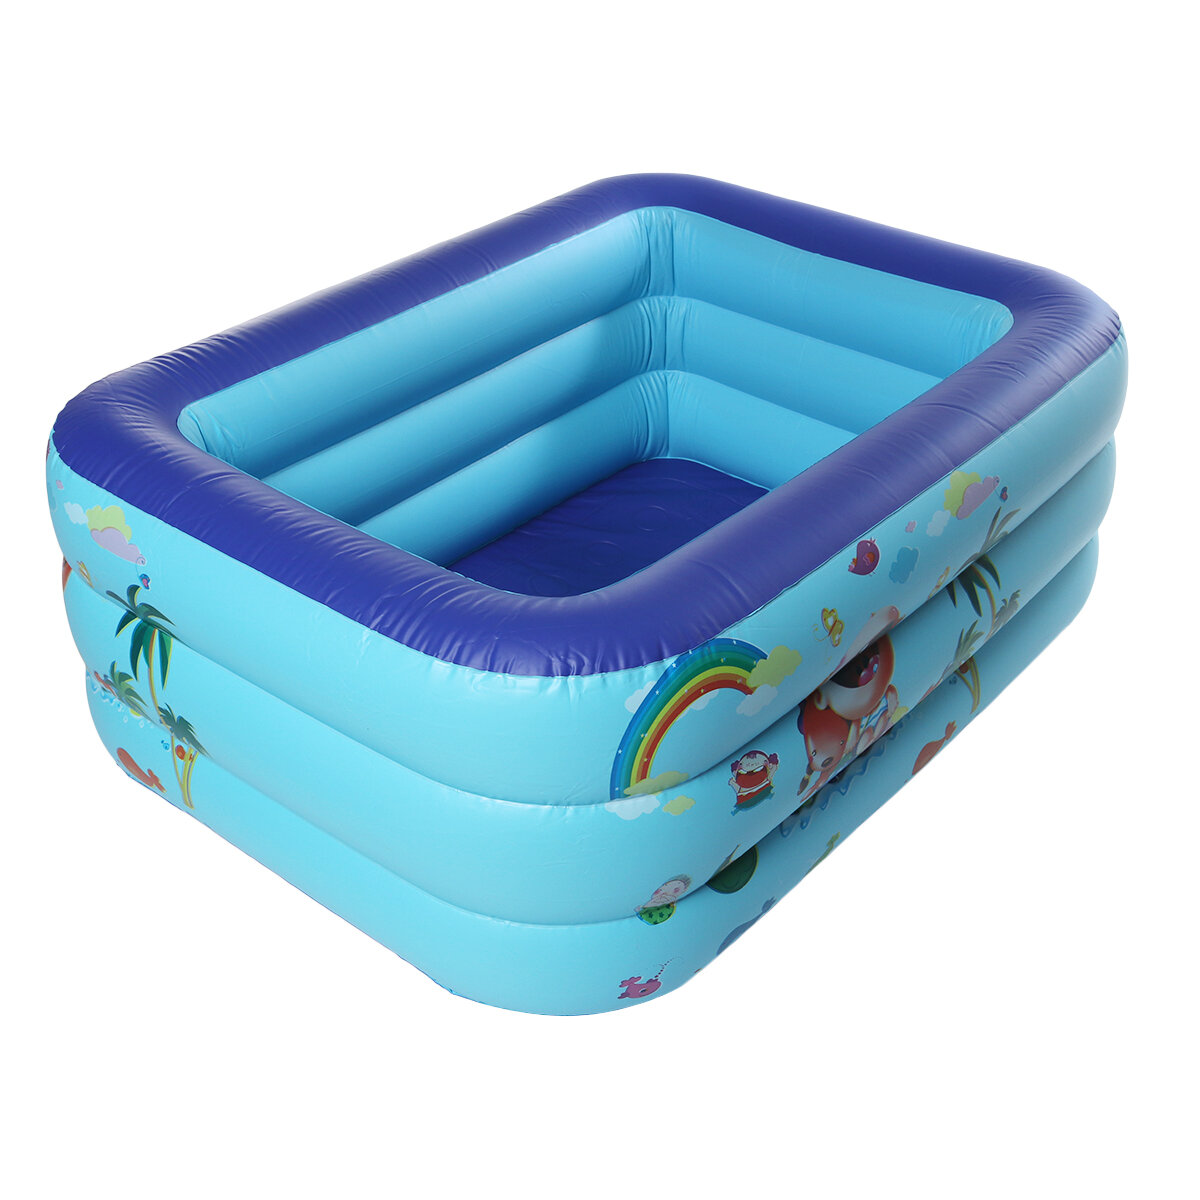 

130×95×50CM Inflatable Swimming Pool Square Kids Children's Home Use Paddling Pool Portable Foldable Bathing Tub